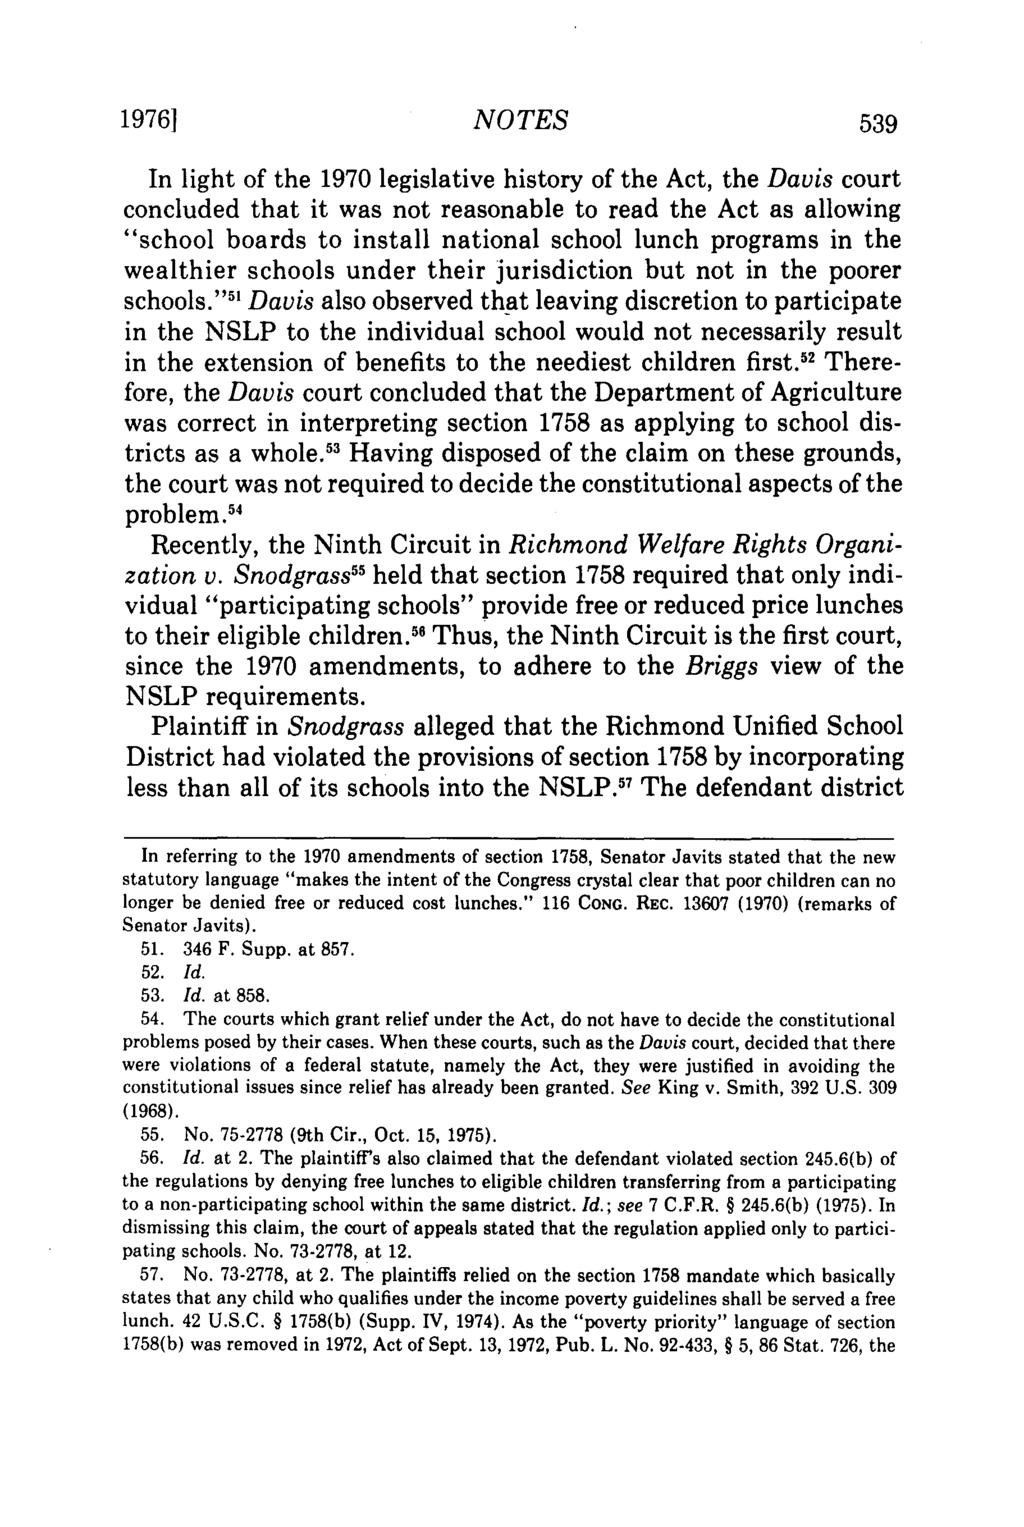 19761 NOTES In light of the 1970 legislative history of the Act, the Davis court concluded that it was not reasonable to read the Act as allowing "school boards to install national school lunch